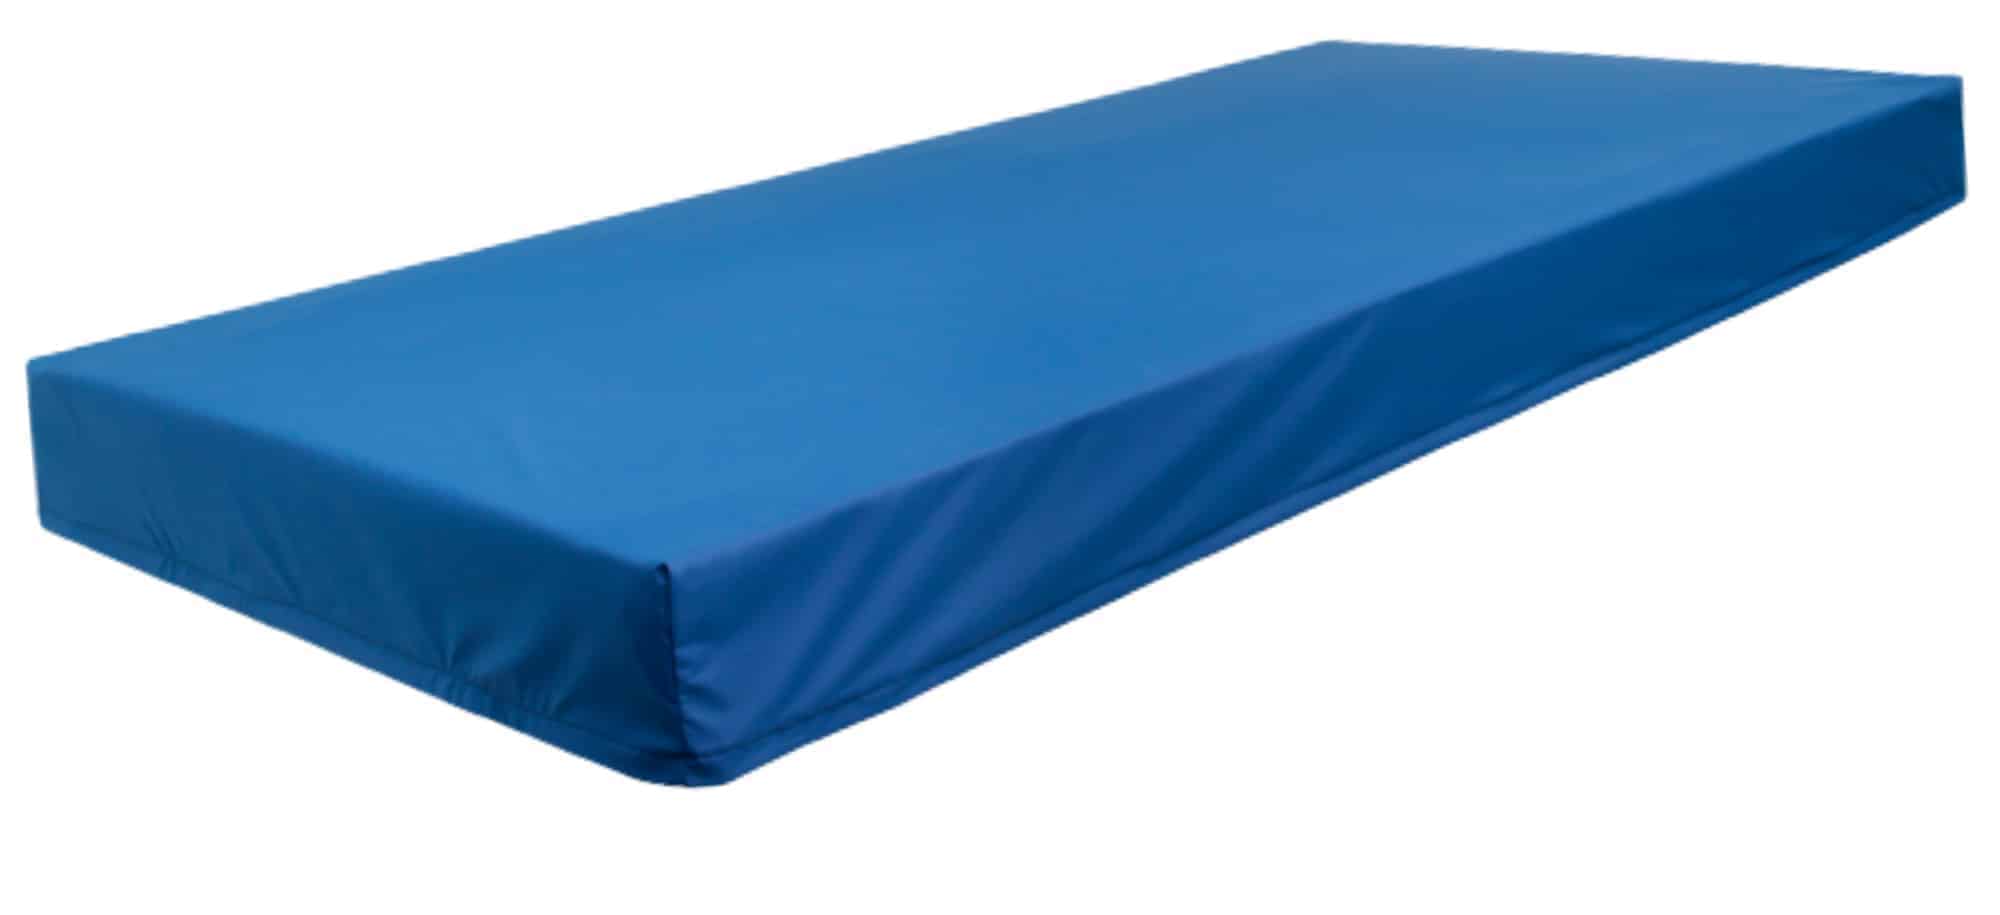 a large blue mattress on a white background.